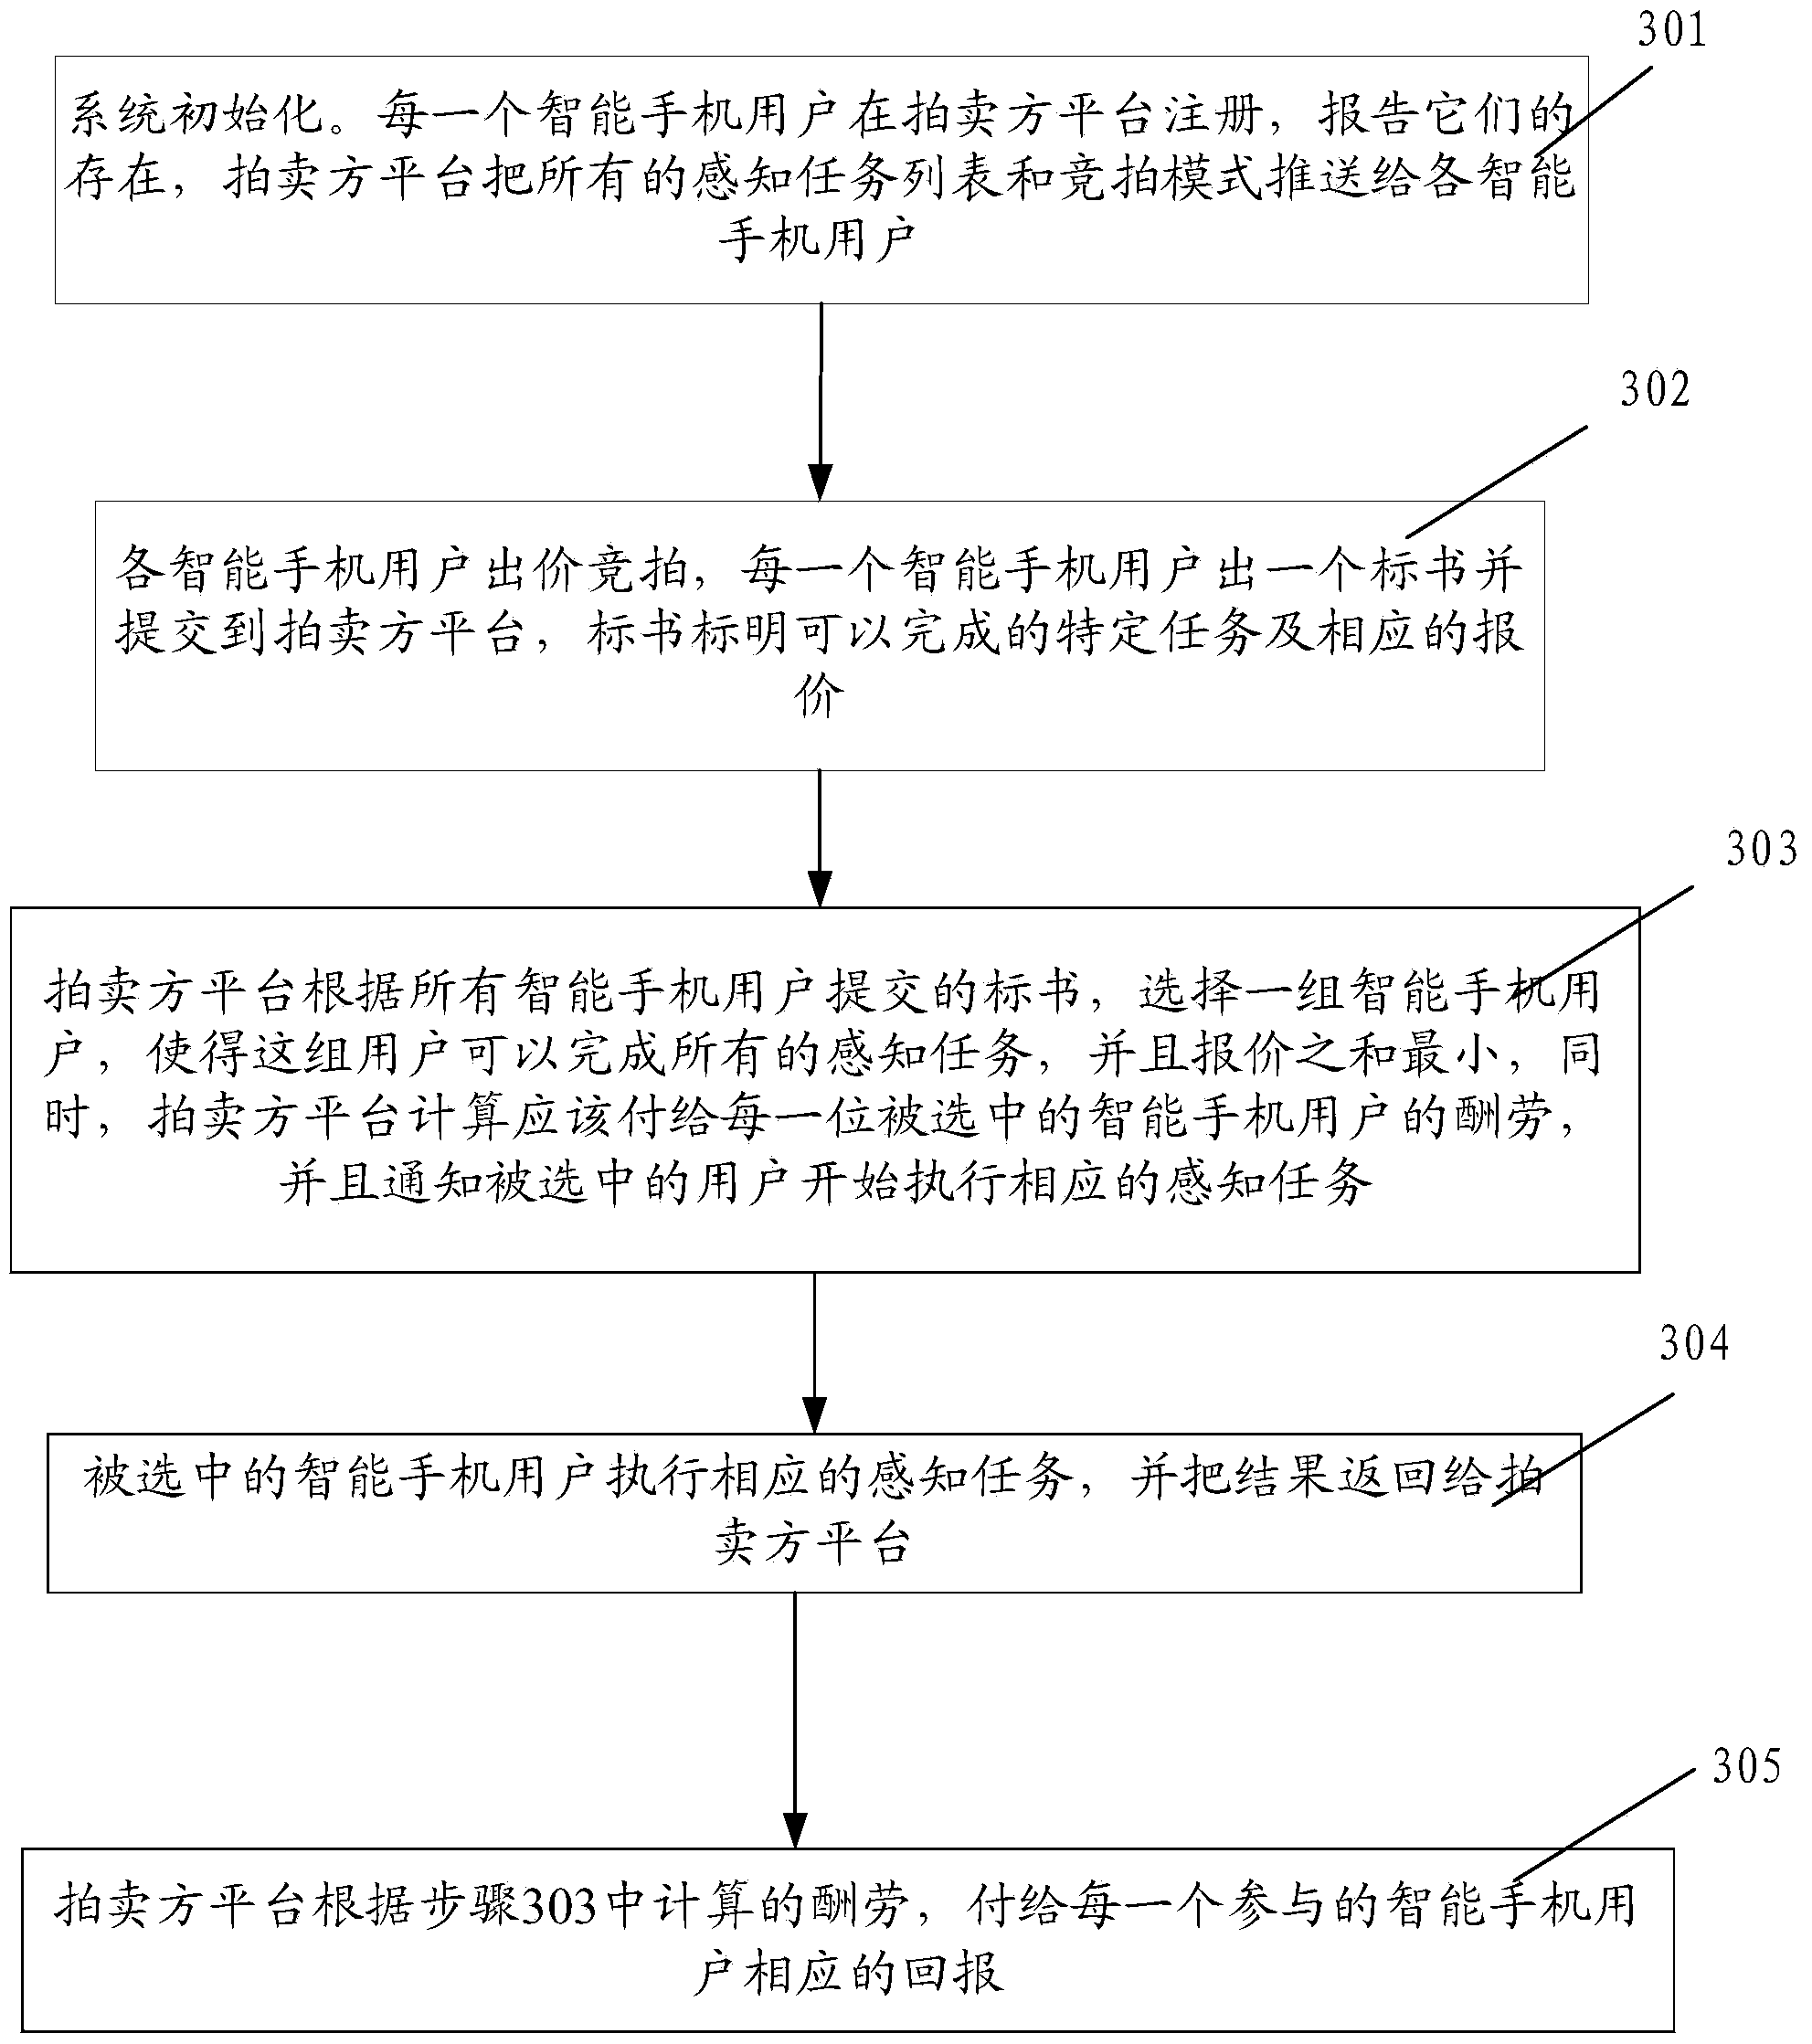 Method and system for preventing fraudulent auction in group intelligent perception system